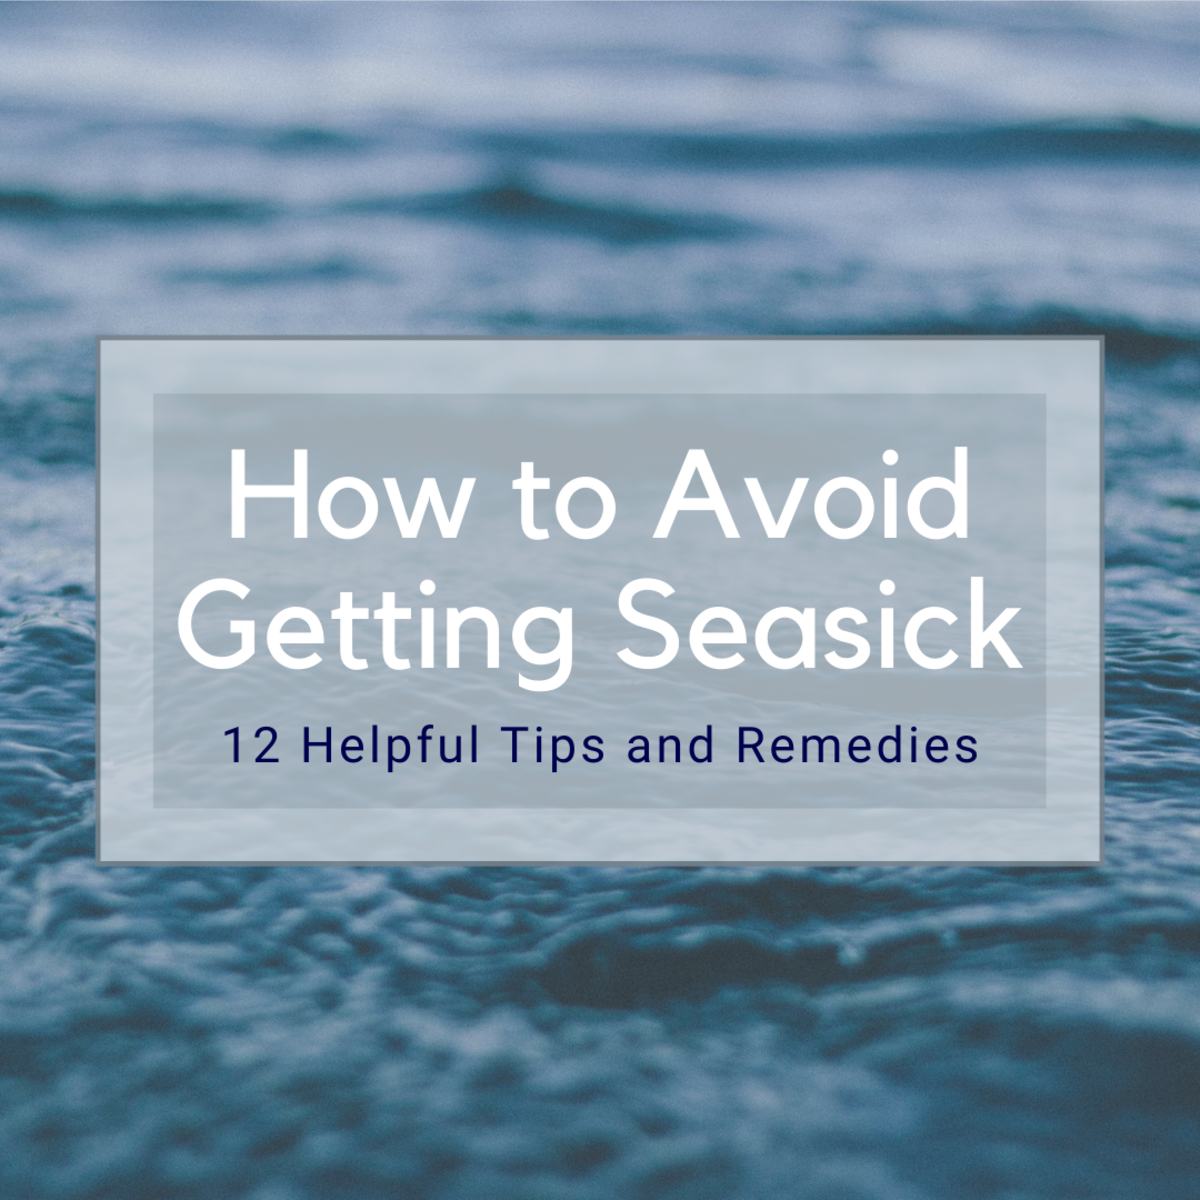 How to Avoid Getting Seasick on a Cruise (12 Tips and Tricks)